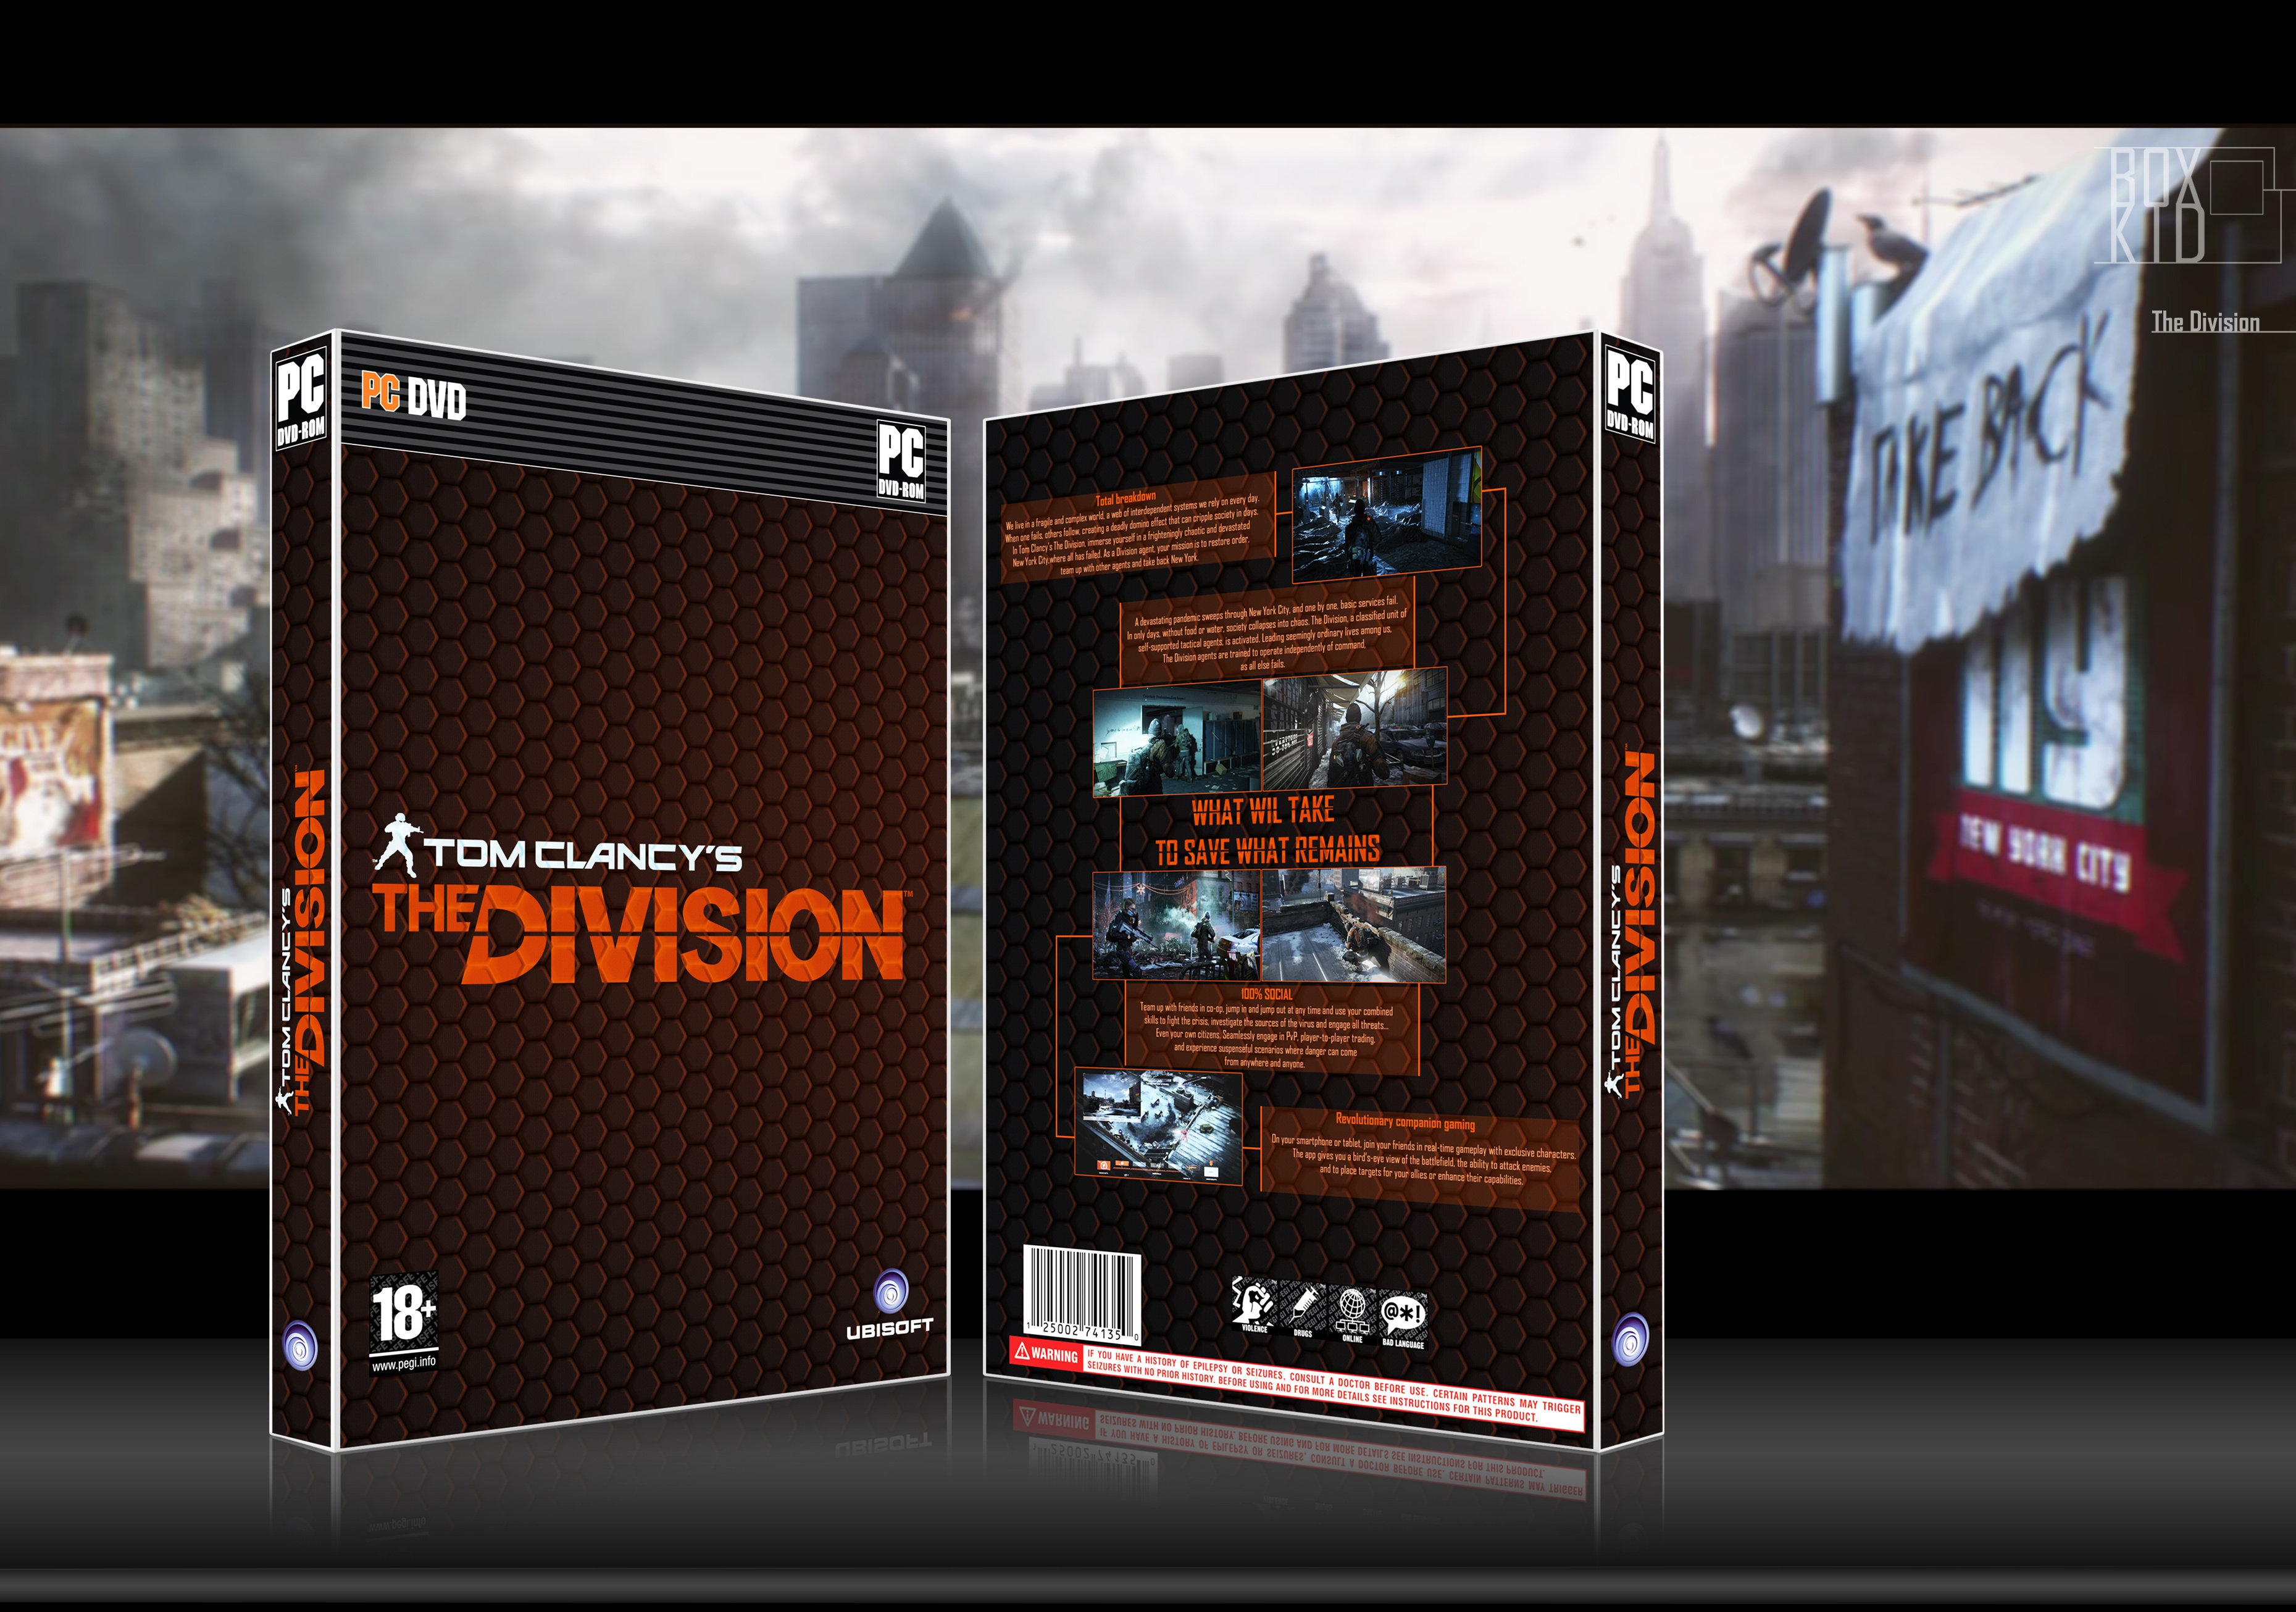 The Division box cover